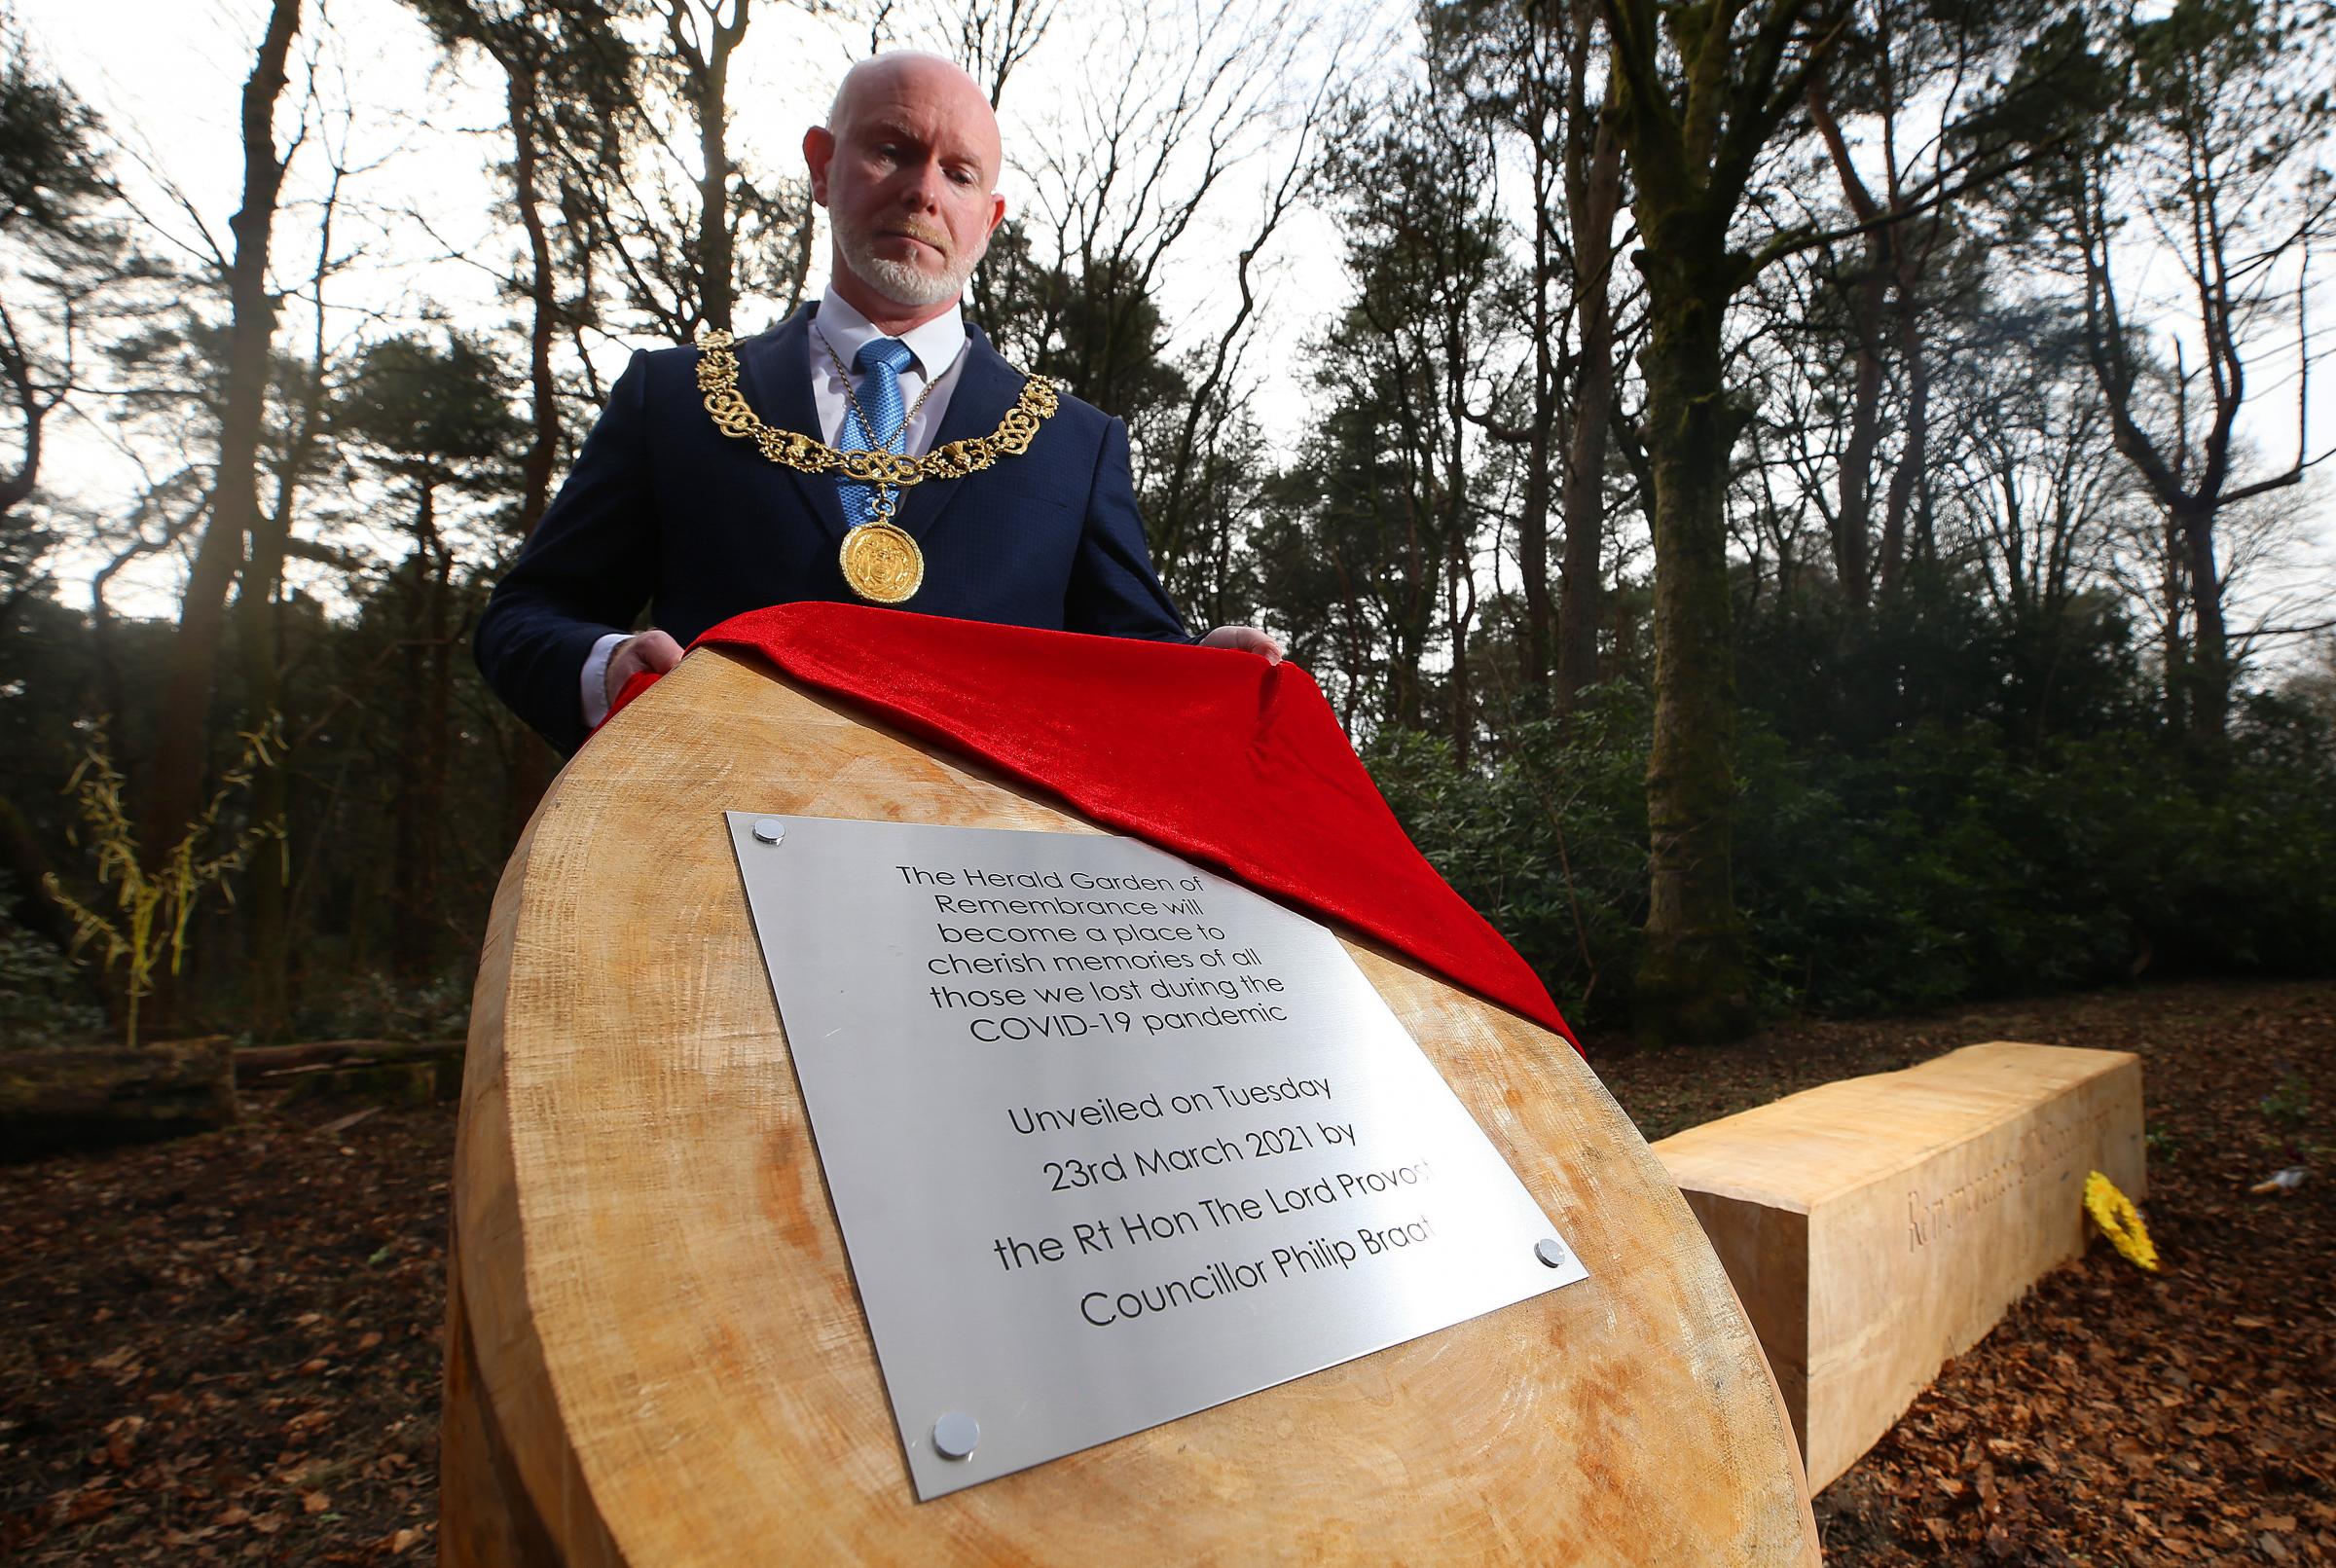 The plaque unvieled by Lord Provost of Glasgow Philip Braat in Pollok Country Park, was taken within hours